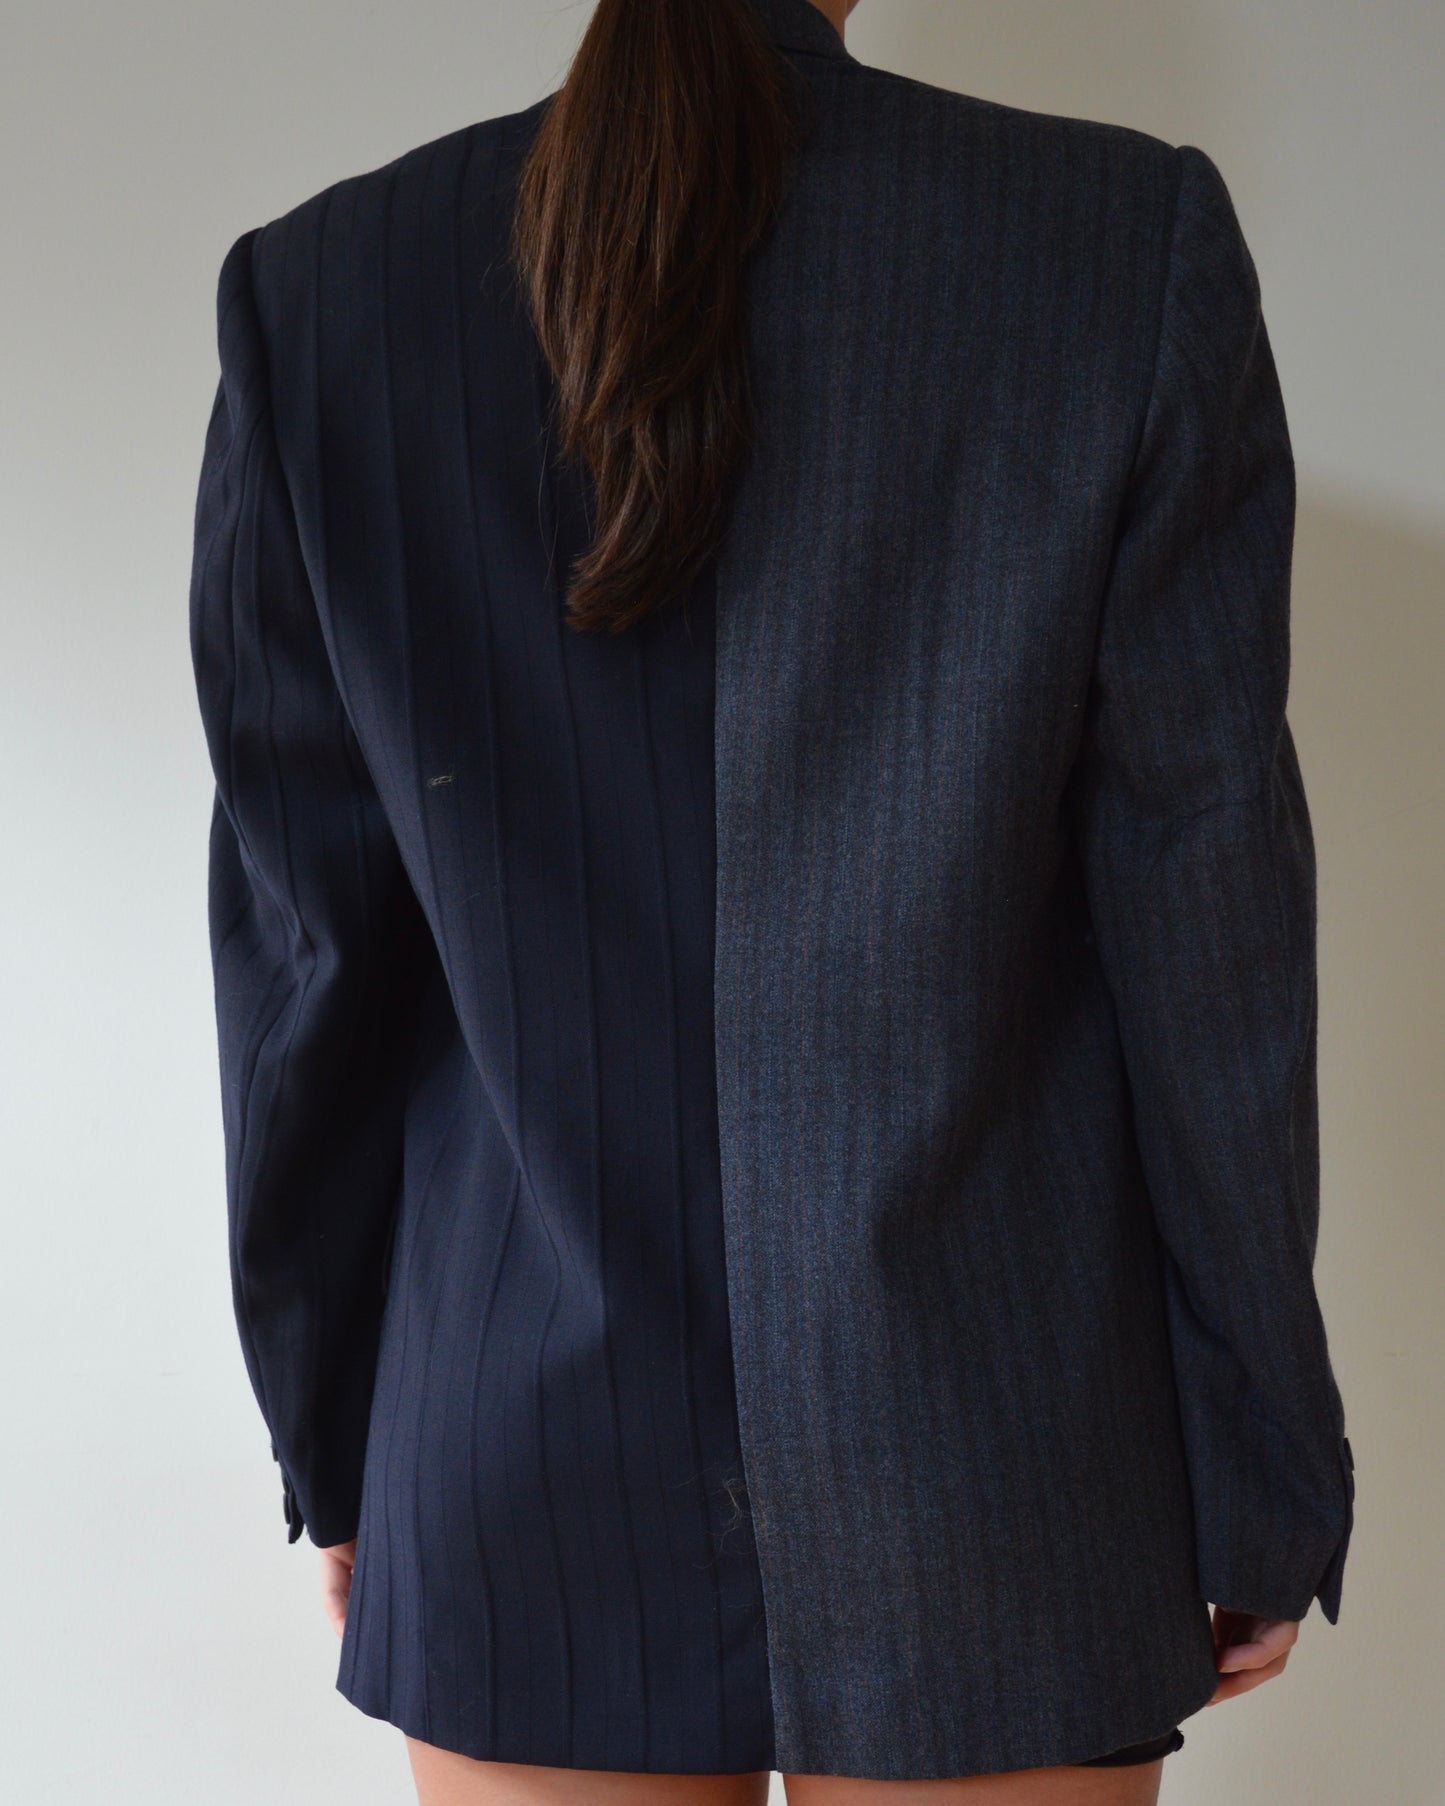 DUO Blazer - double breasted navy on gray (S/L)